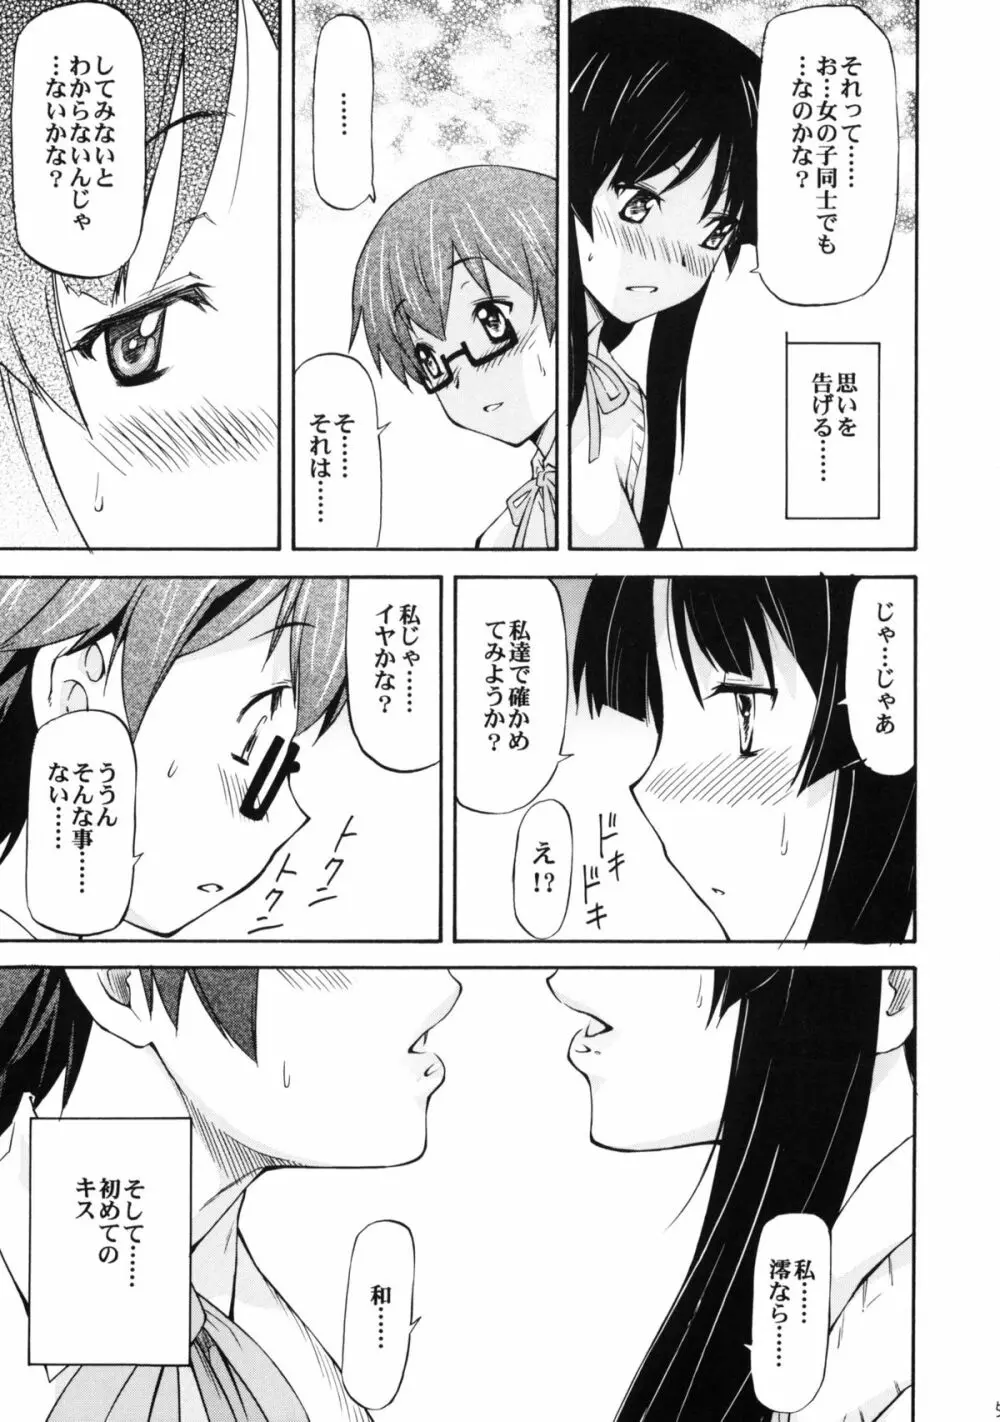 LeLeぱっぱ Vol.16 Re;Re; - page6